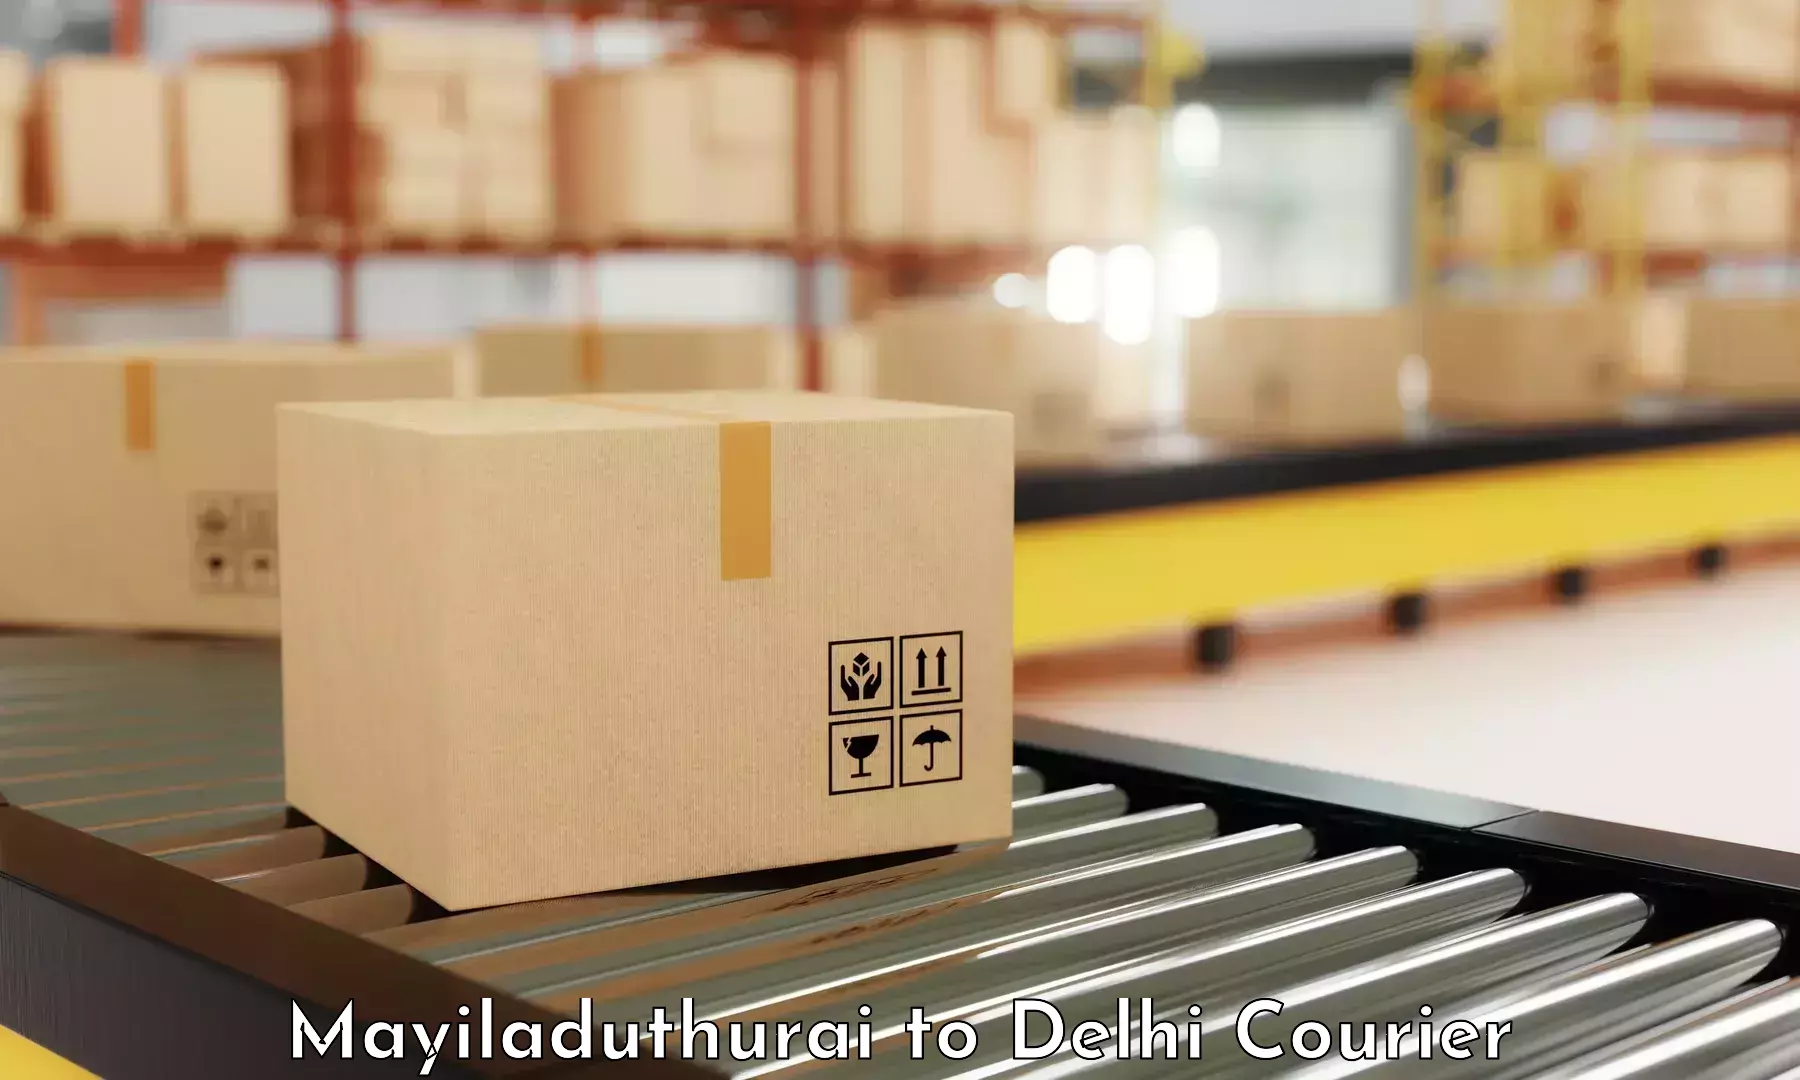 Speedy delivery service Mayiladuthurai to East Delhi